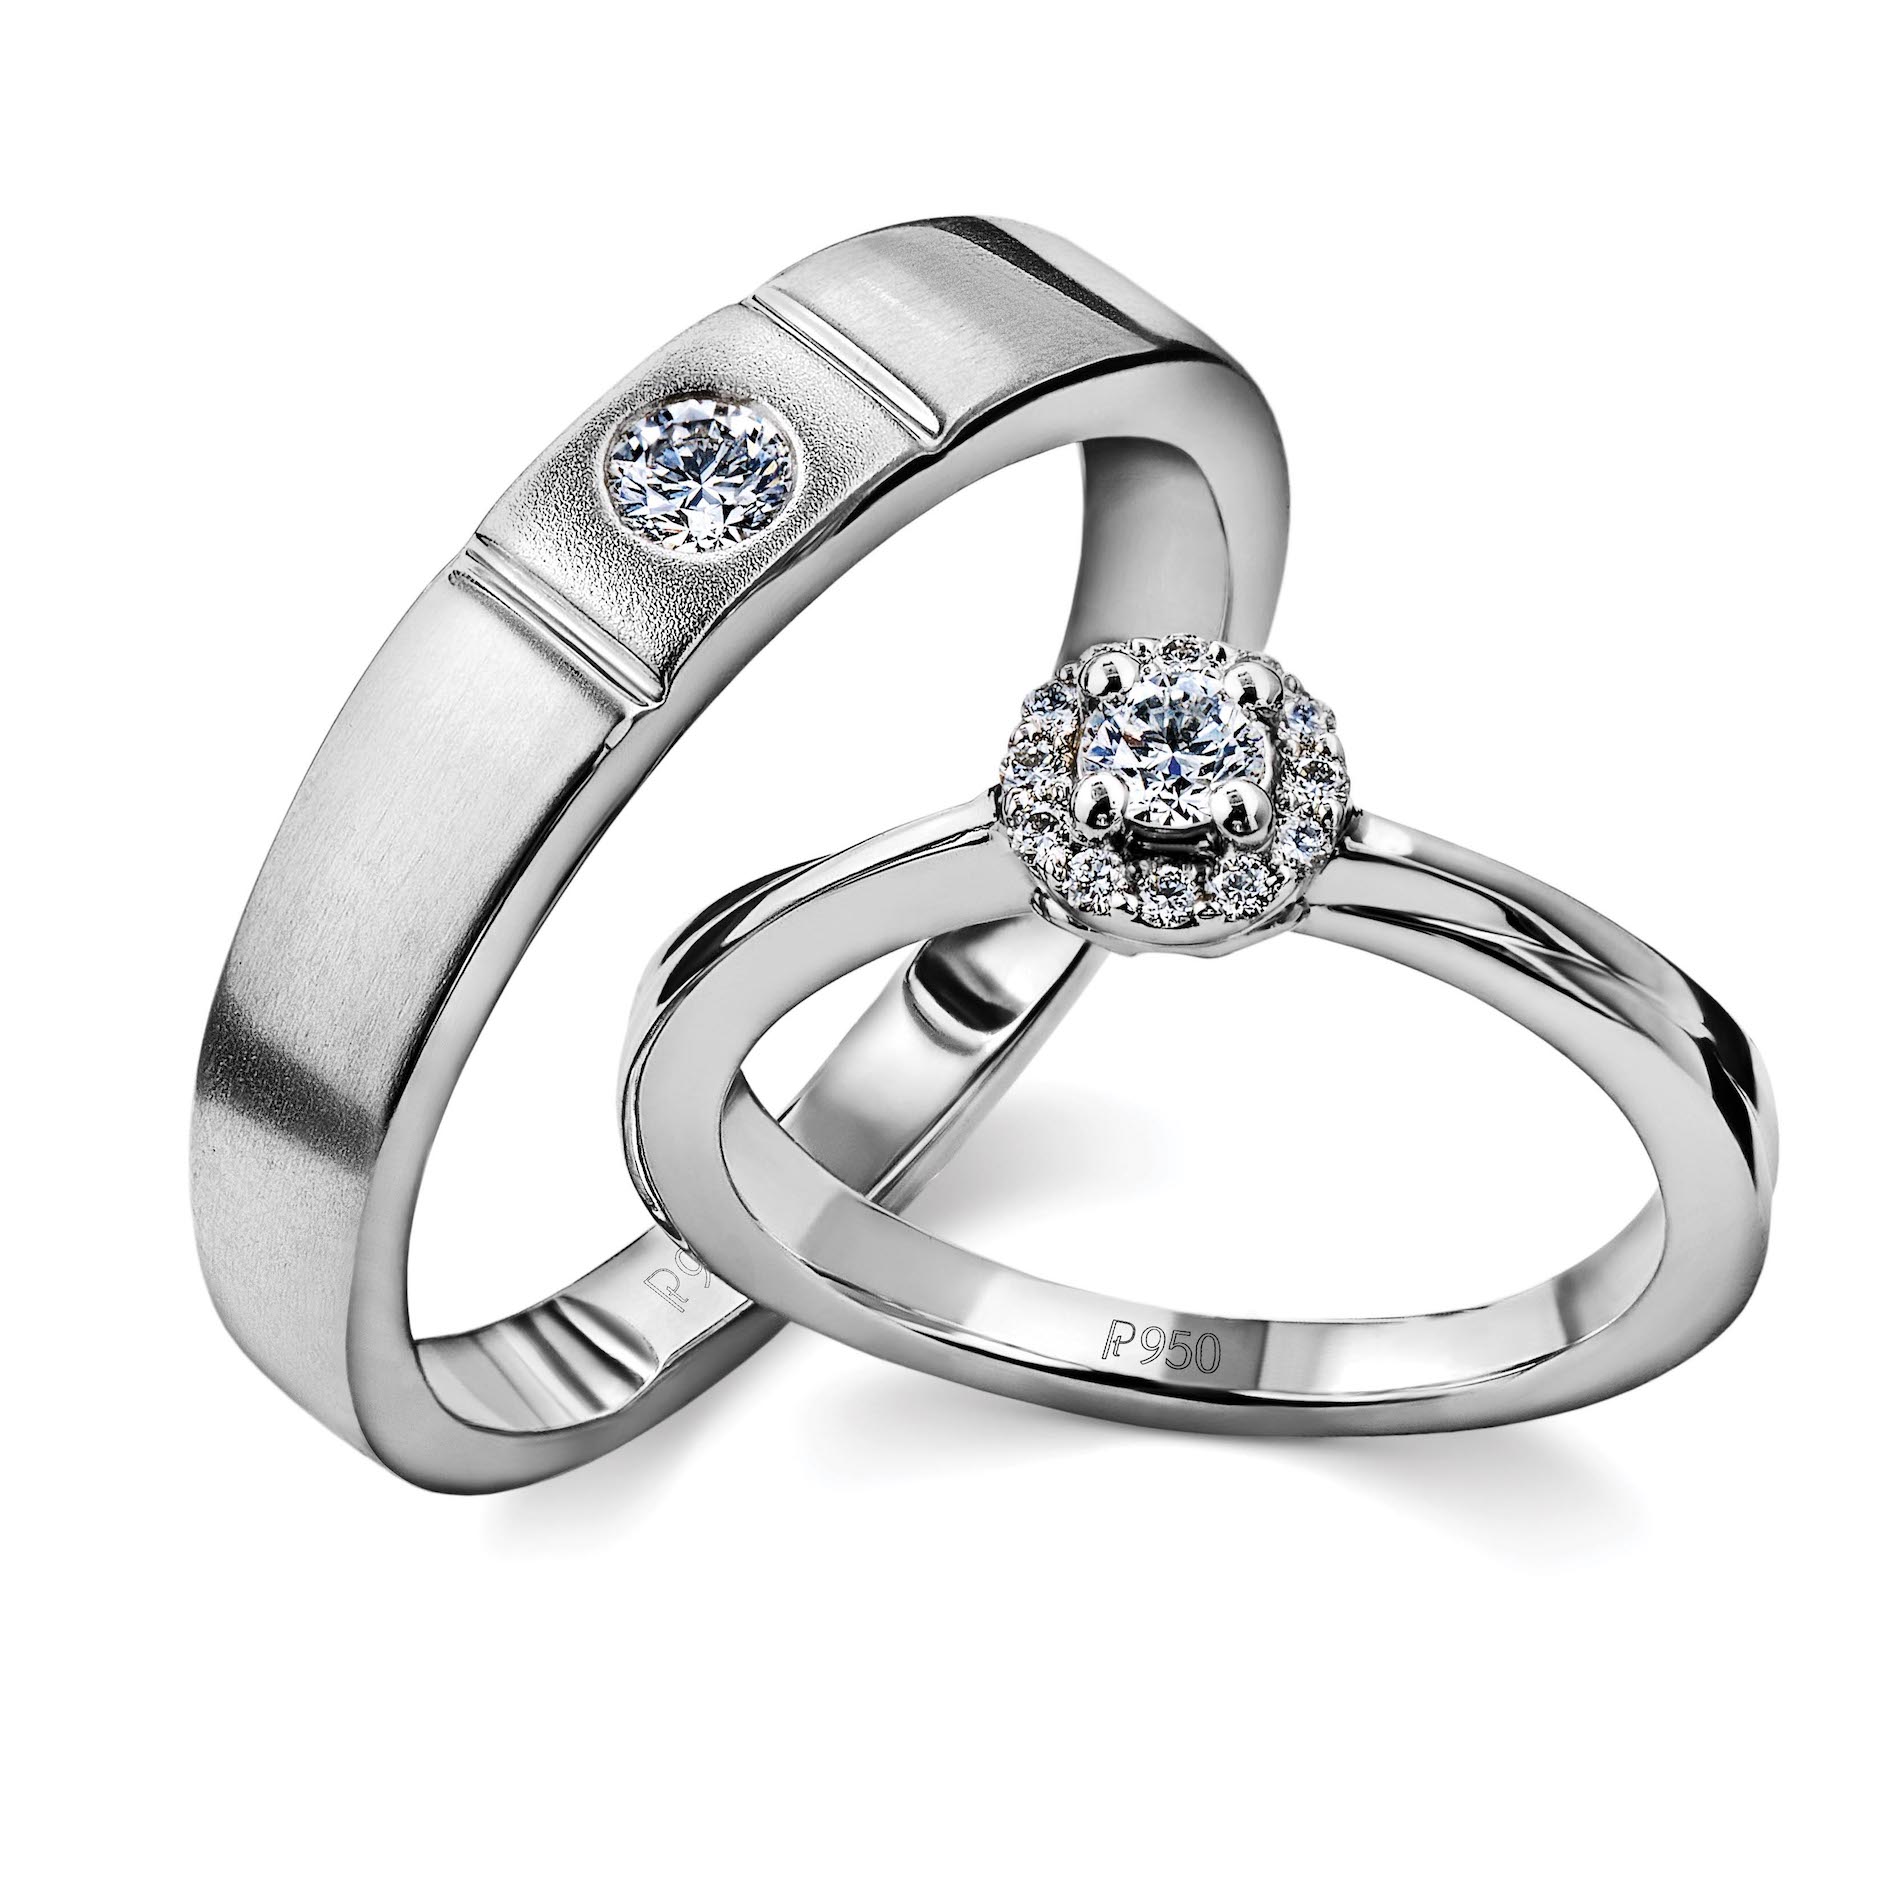 12745273 Platinum Rings For Couple With Single Diamonds Jl Pt 593 By Jewelove 